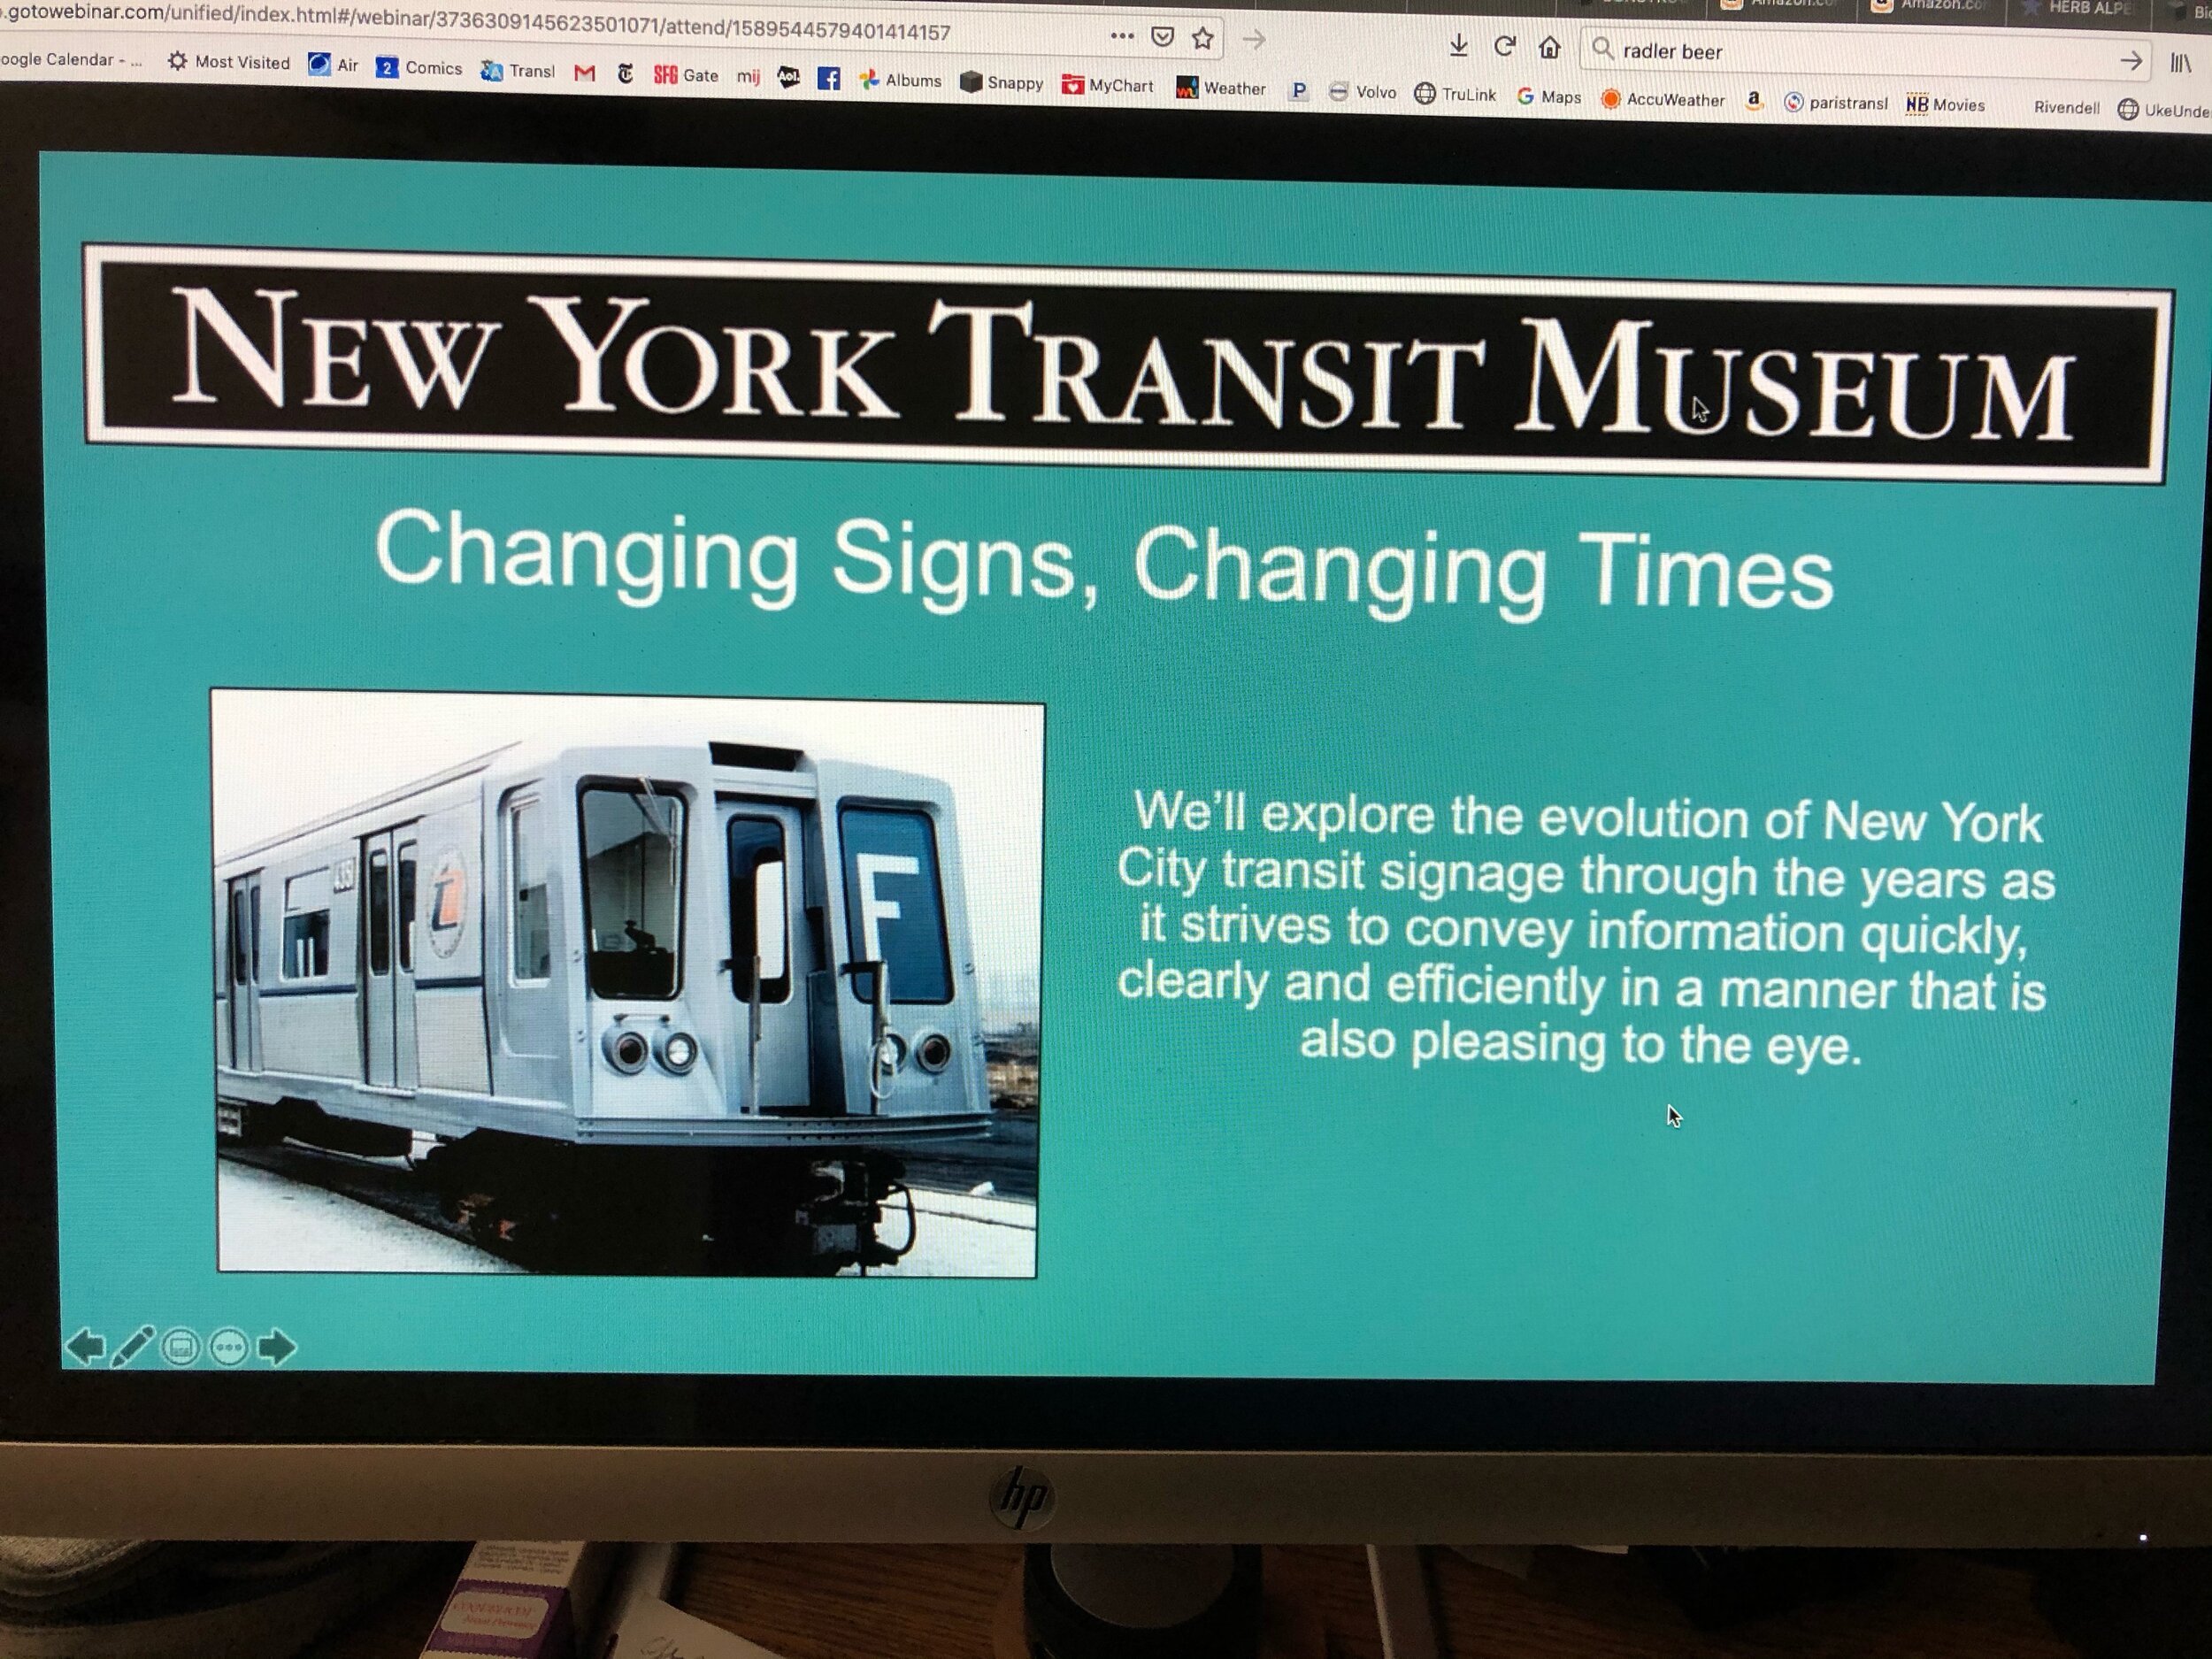 I've seen several really good programs sponsored by the NY Transit Museum. 